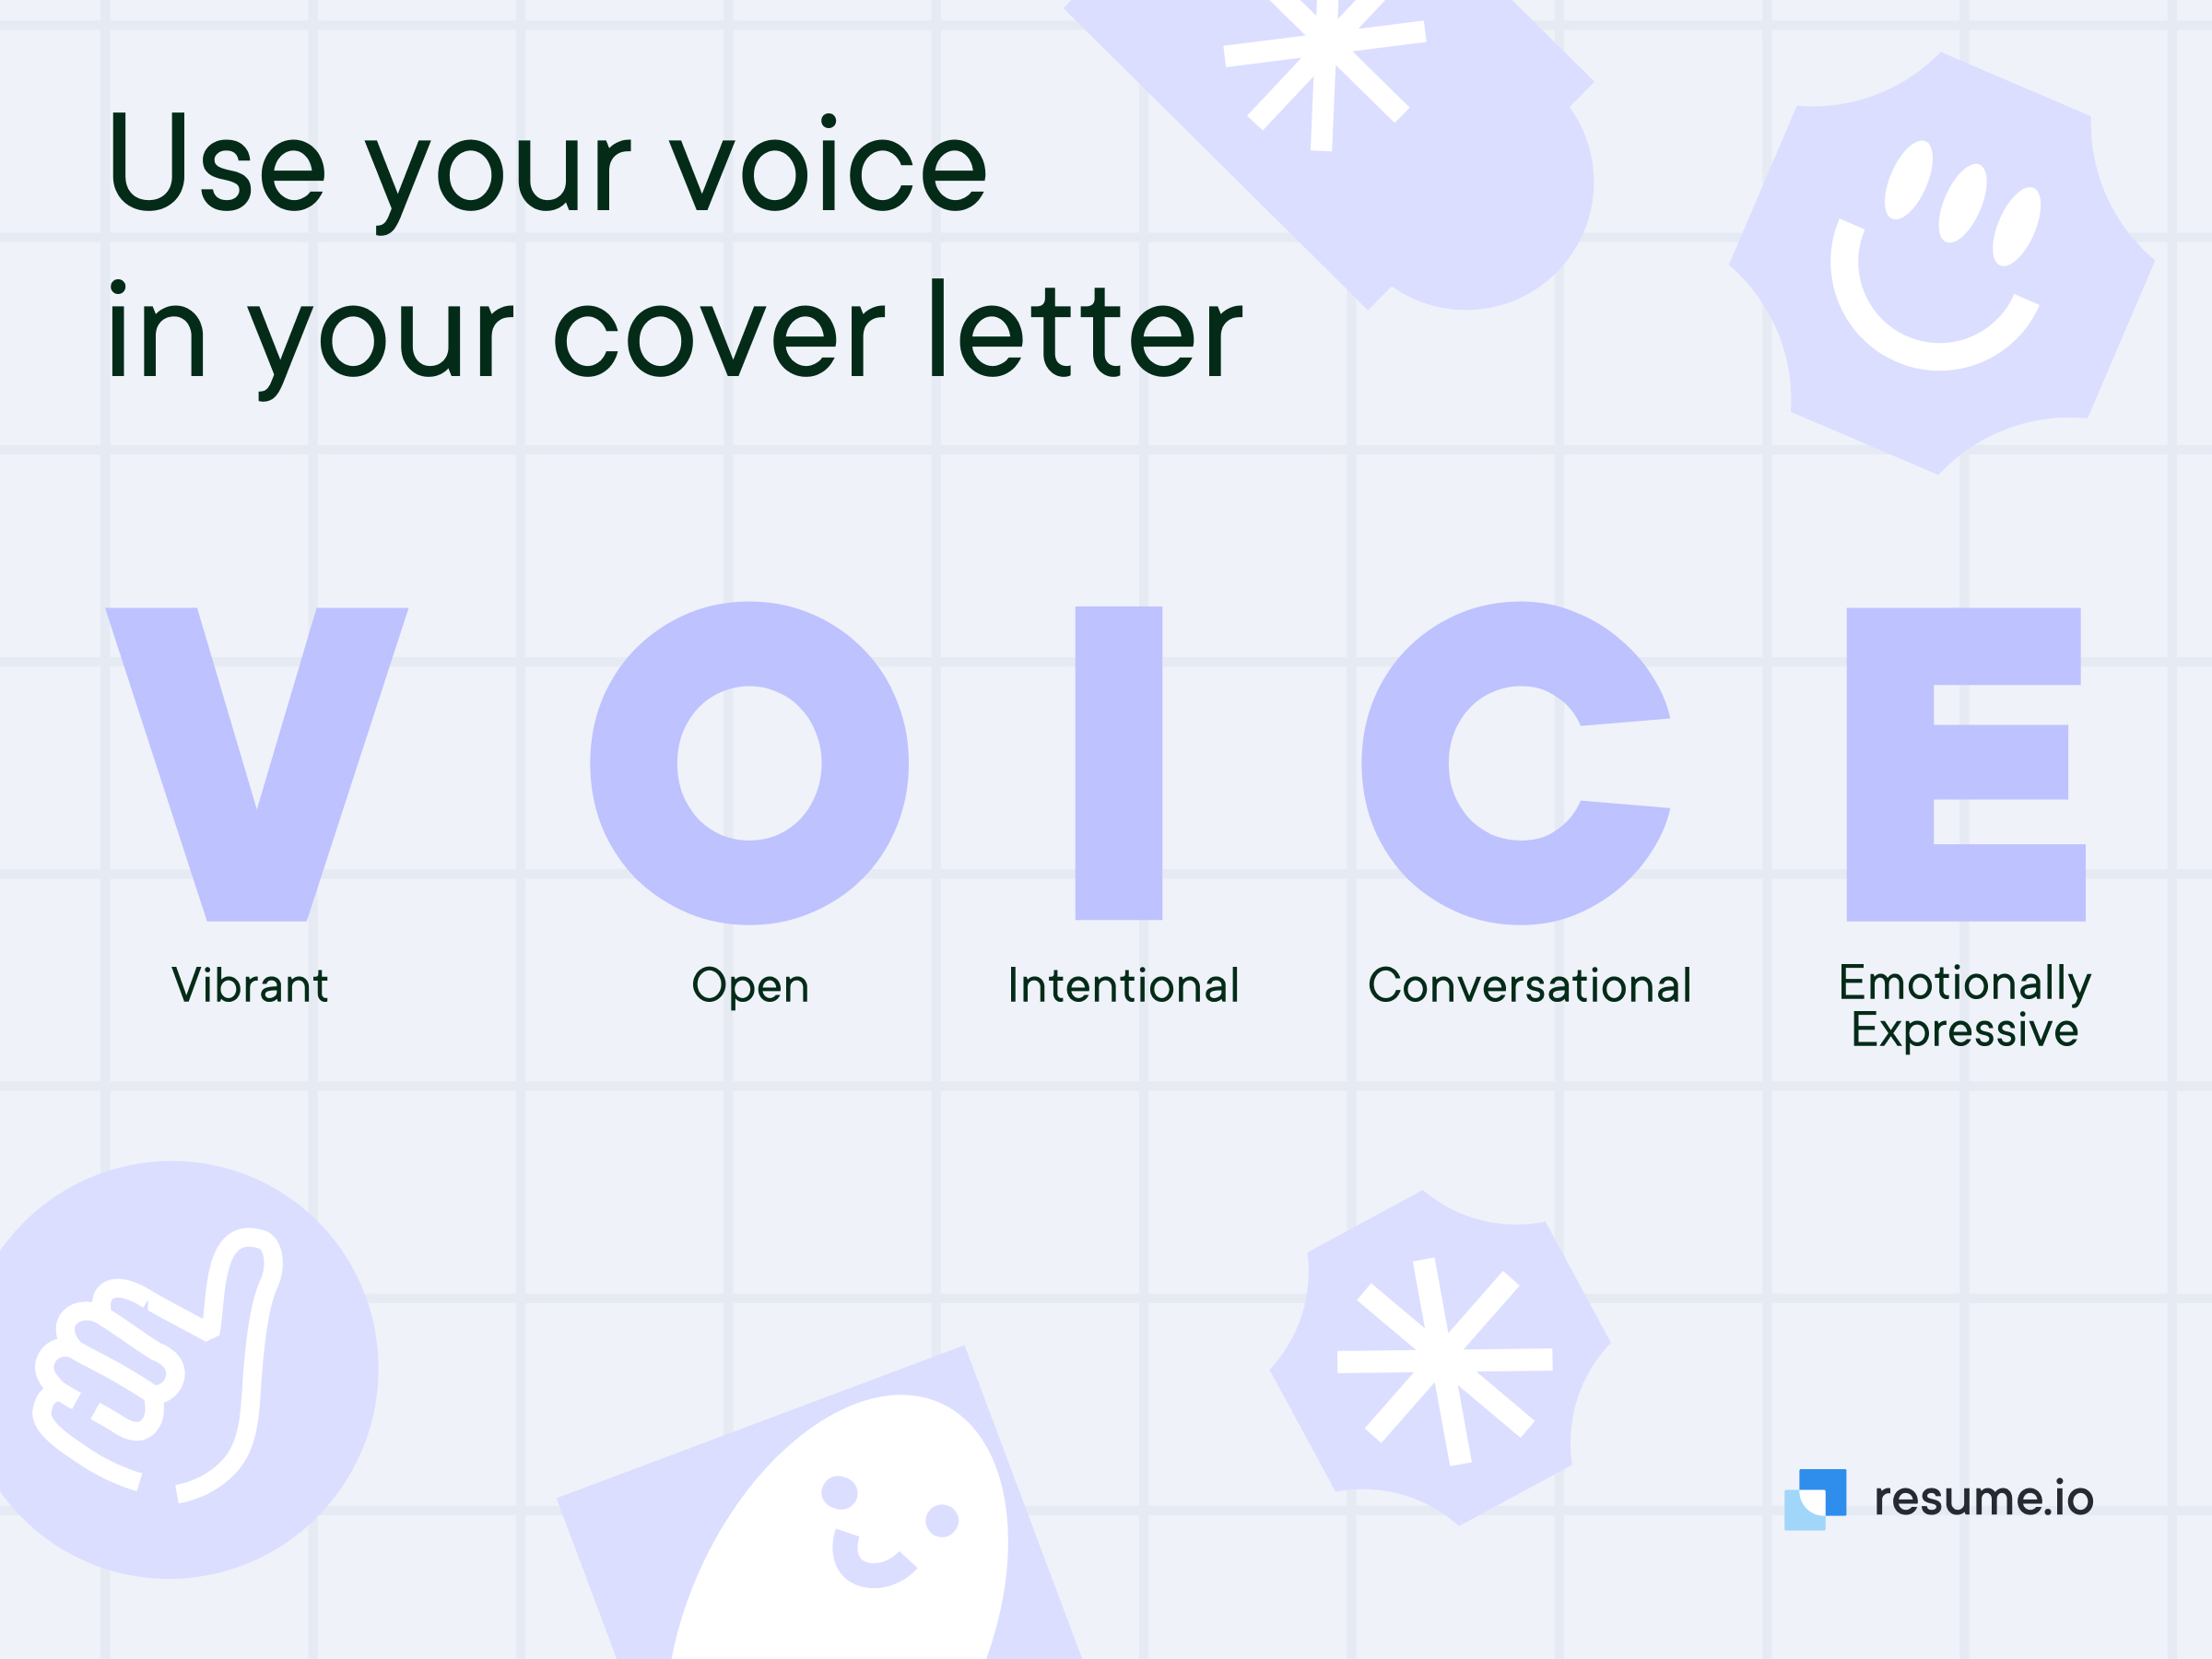 VOICE stands for Vibrant, Open, Intentional, Conversational and Emotionally expressive: Use your voice in your cover letter!